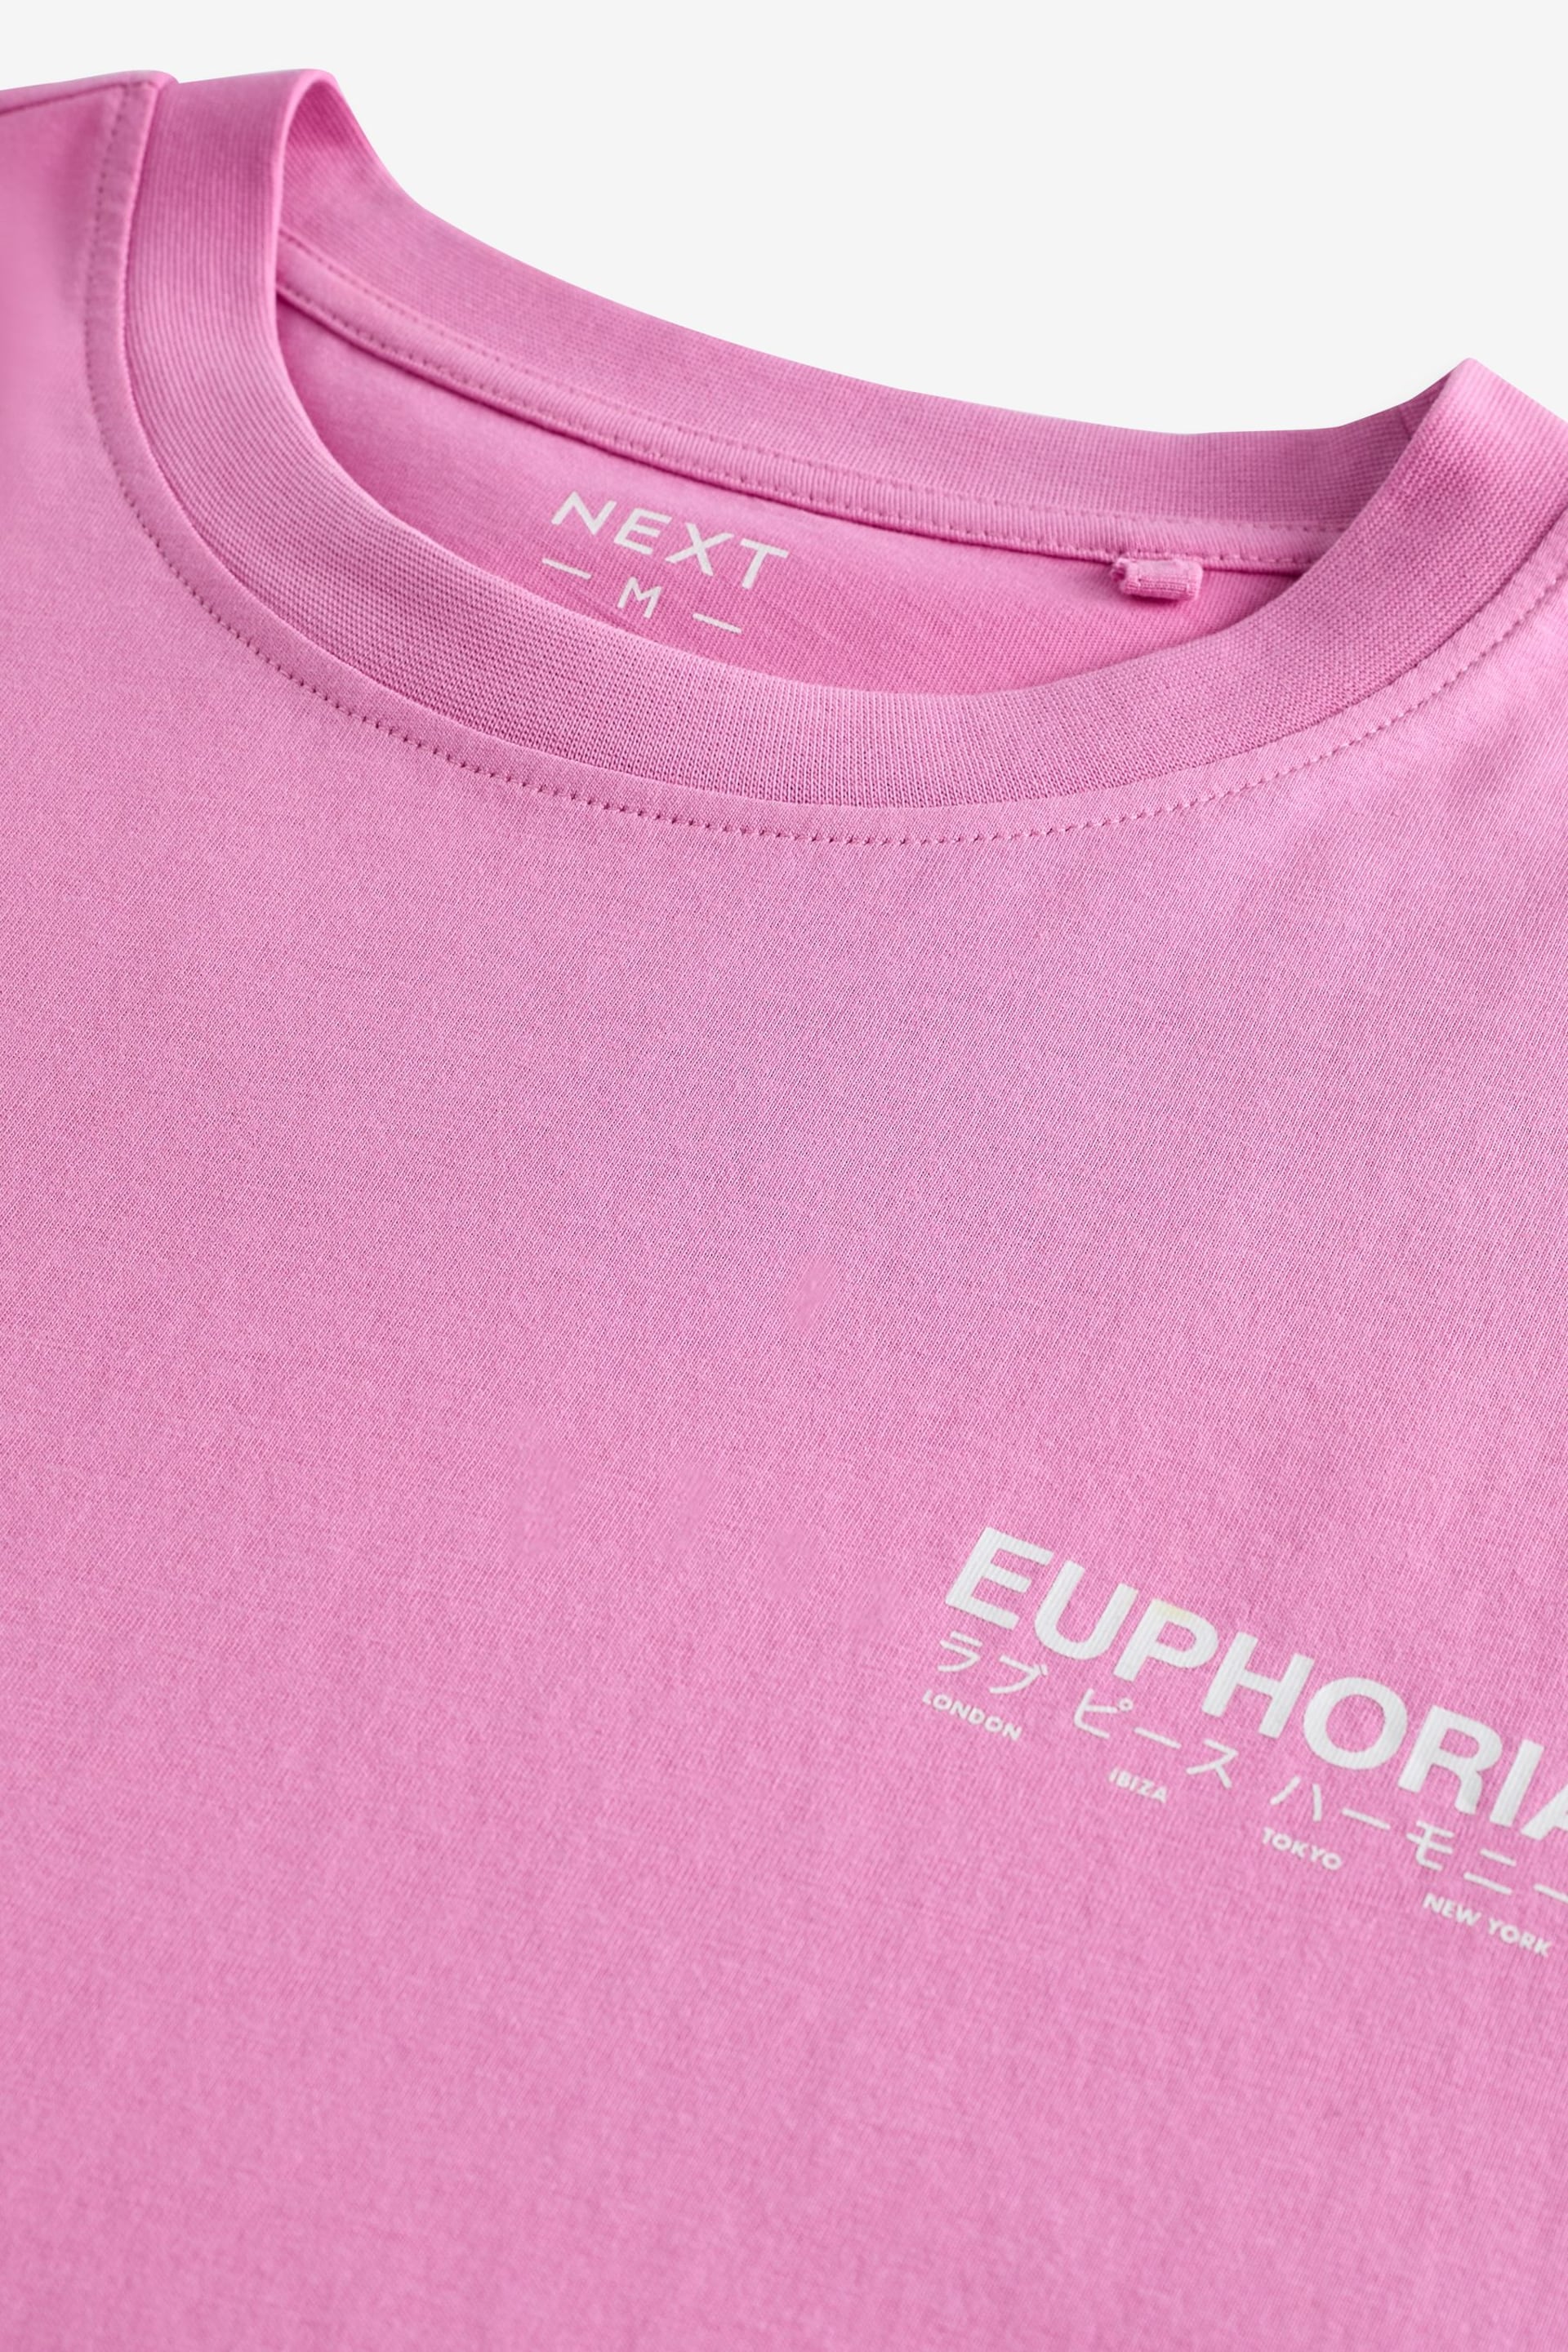 Pink Relaxed Fit Back Print Graphic T-Shirt - Image 9 of 9